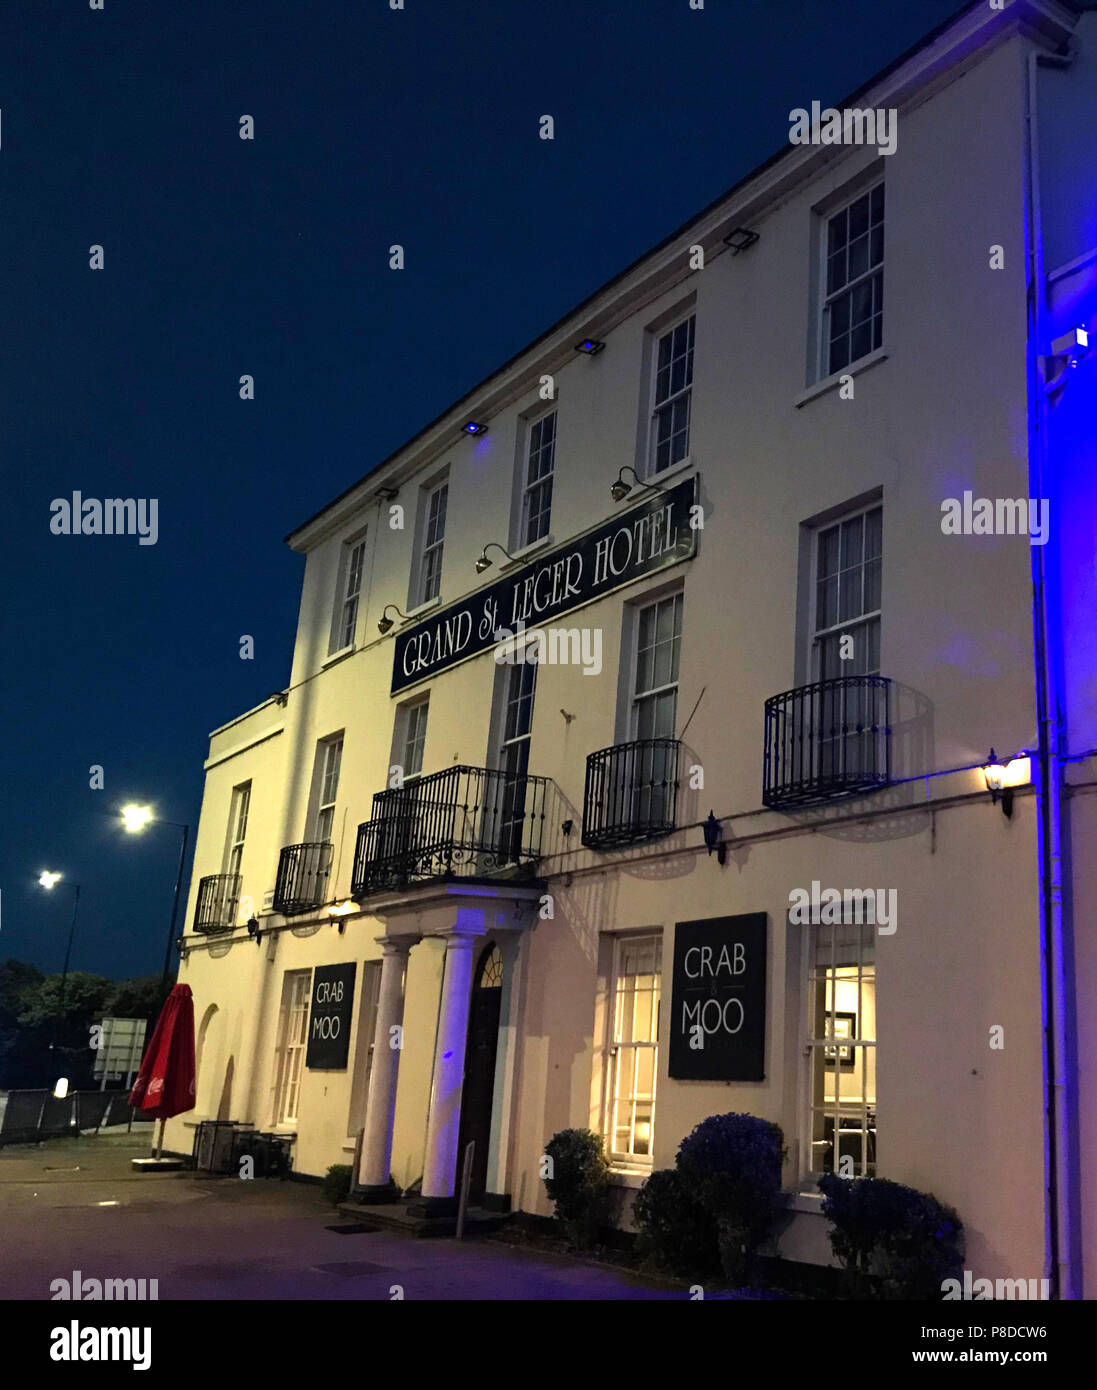 Grand St Leger Hotel 1810 at dusk, racecourse hotel, Bennetthorpe, Doncaster, South Yorkshire, England, UK,  DN2 6AX Stock Photo